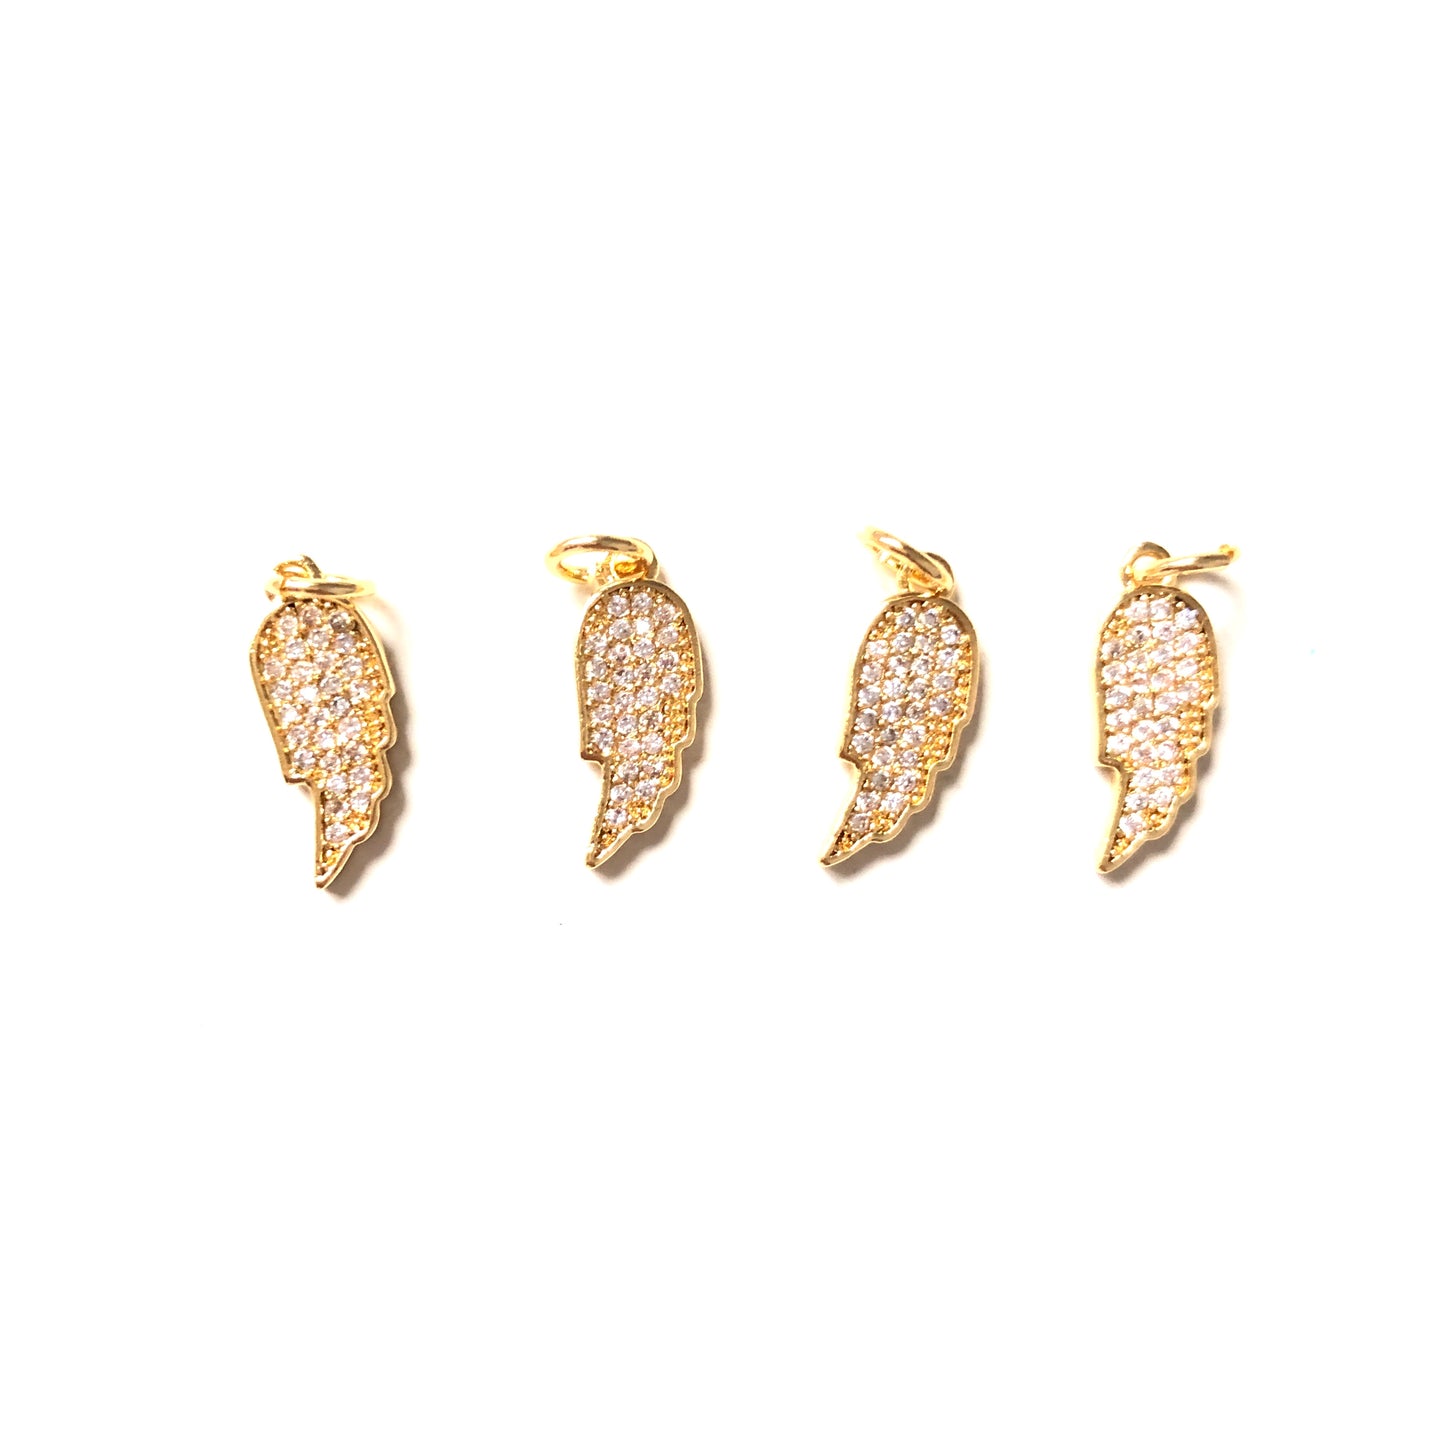 10pcs/lot 15*6mm CZ Paved Wing Charms Gold CZ Paved Charms Small Sizes Wings Charms Beads Beyond